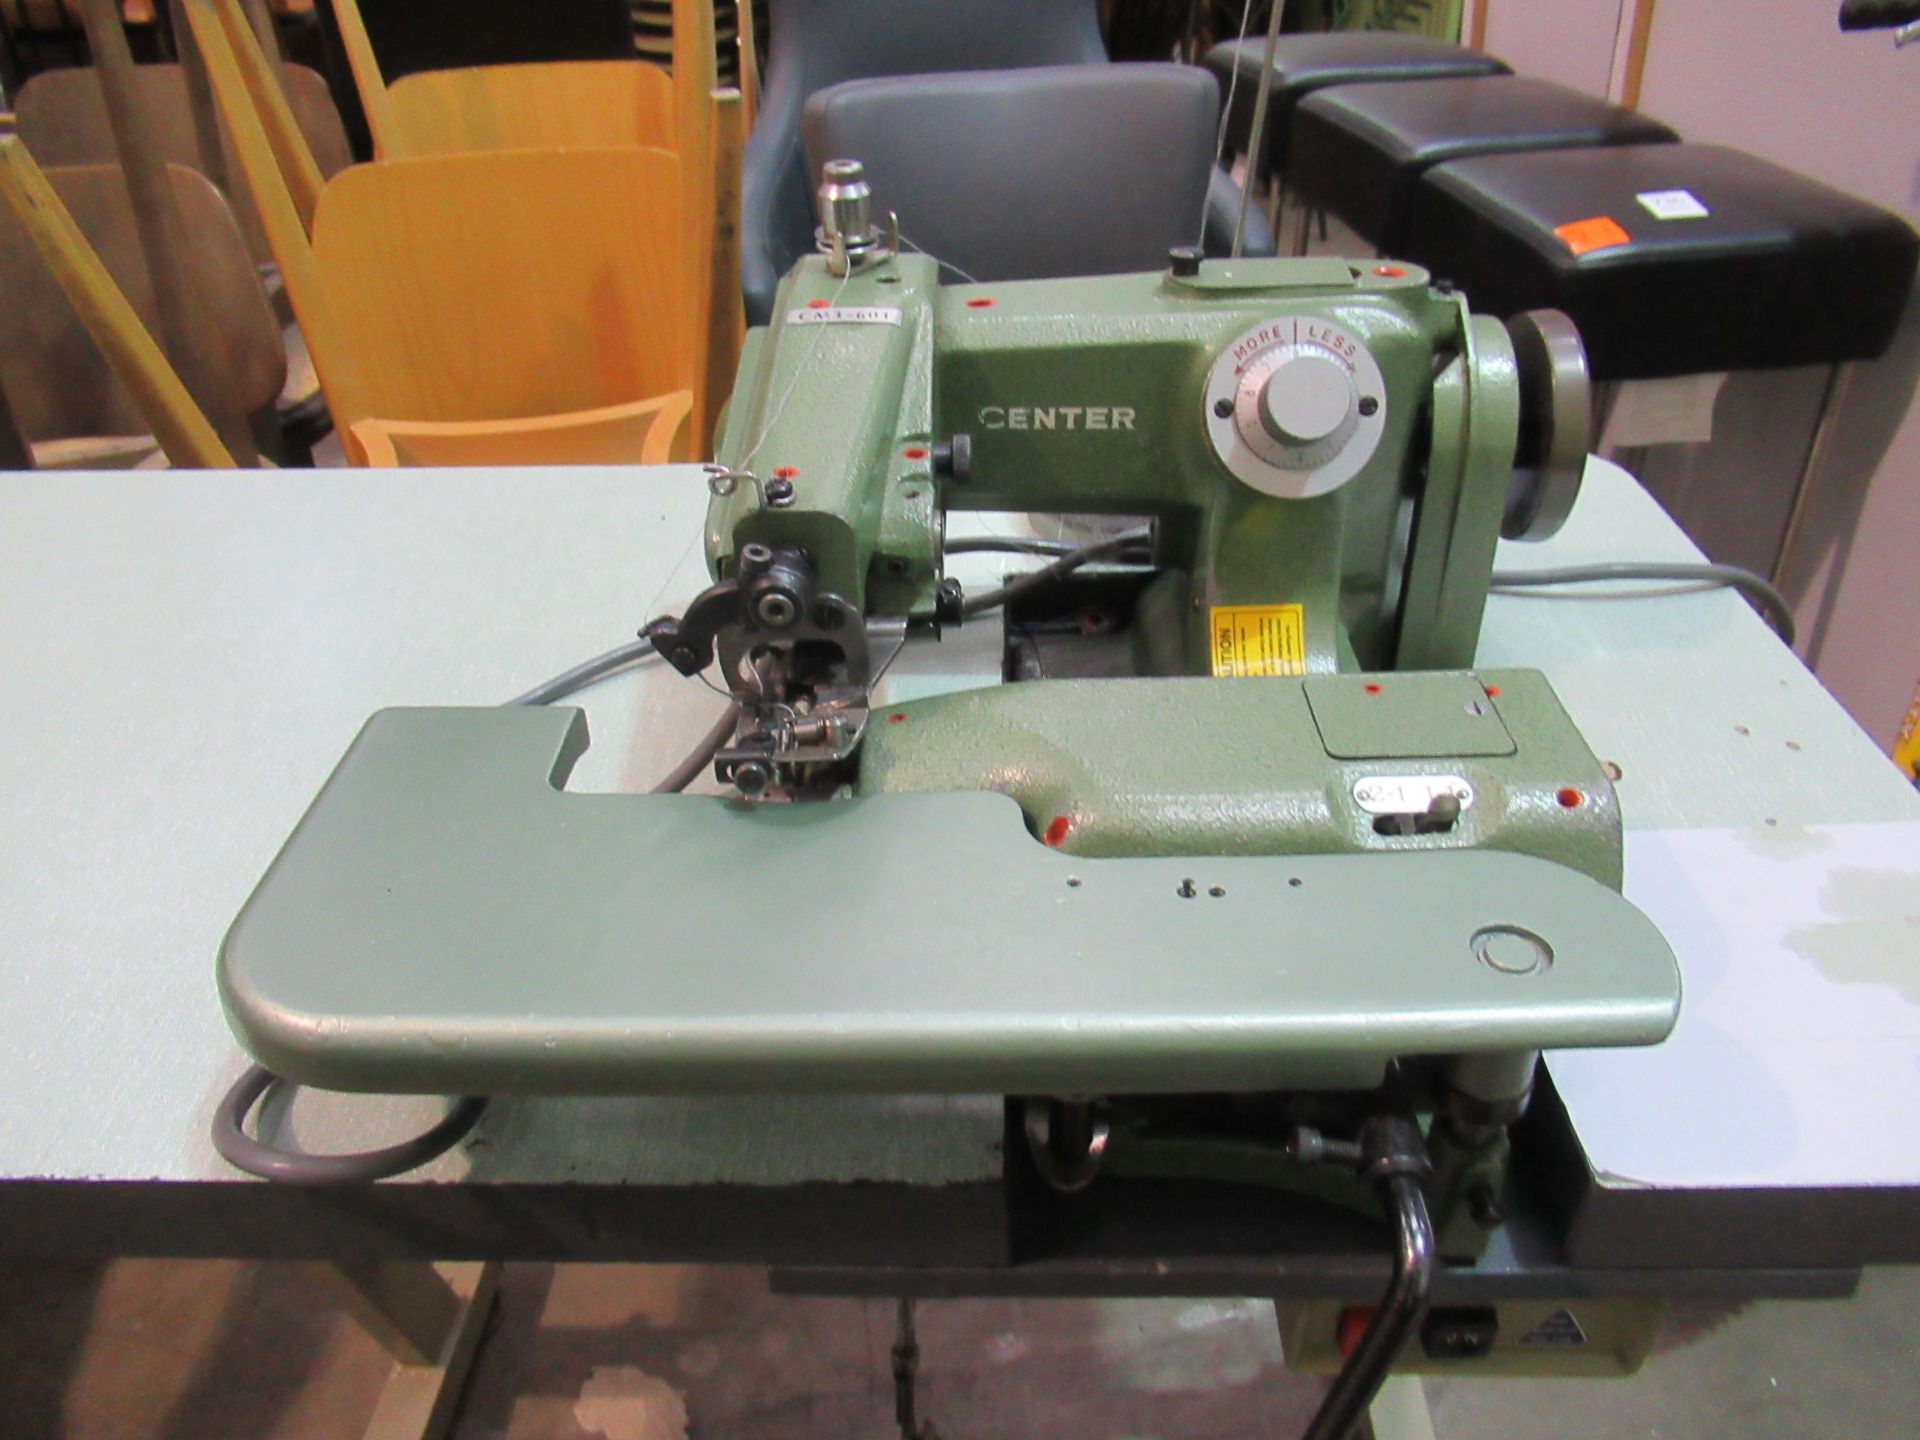 Centre CM3-601 Blind Stitch Sewing Machine Table - Image 2 of 3